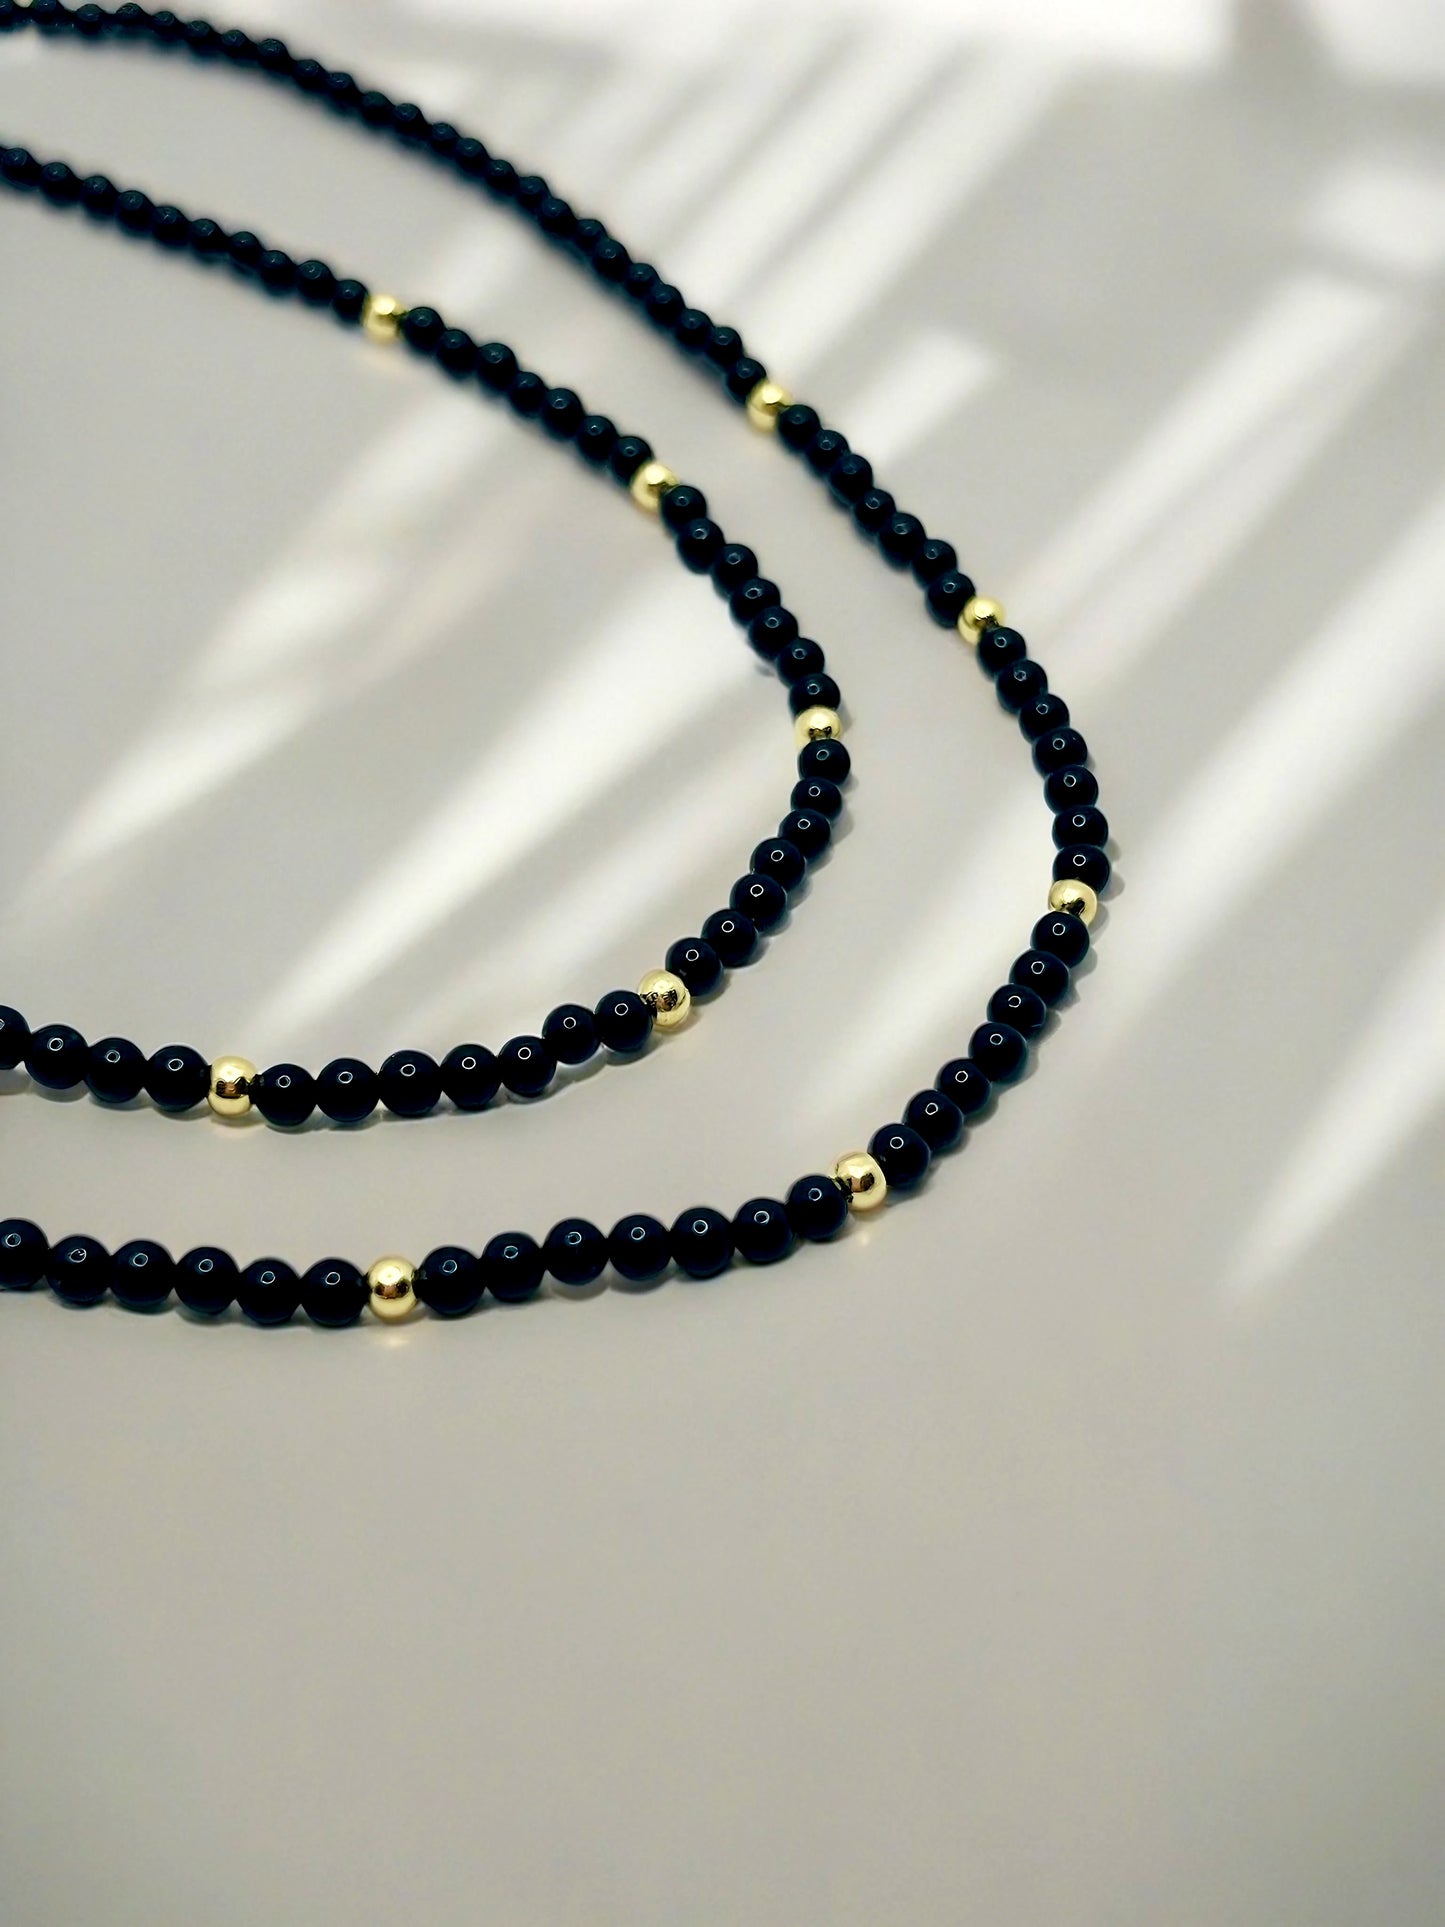 Black Onyx beaded choker necklace with 18k solid gold beads and findings handcrafted | Ella Creations Jewelry